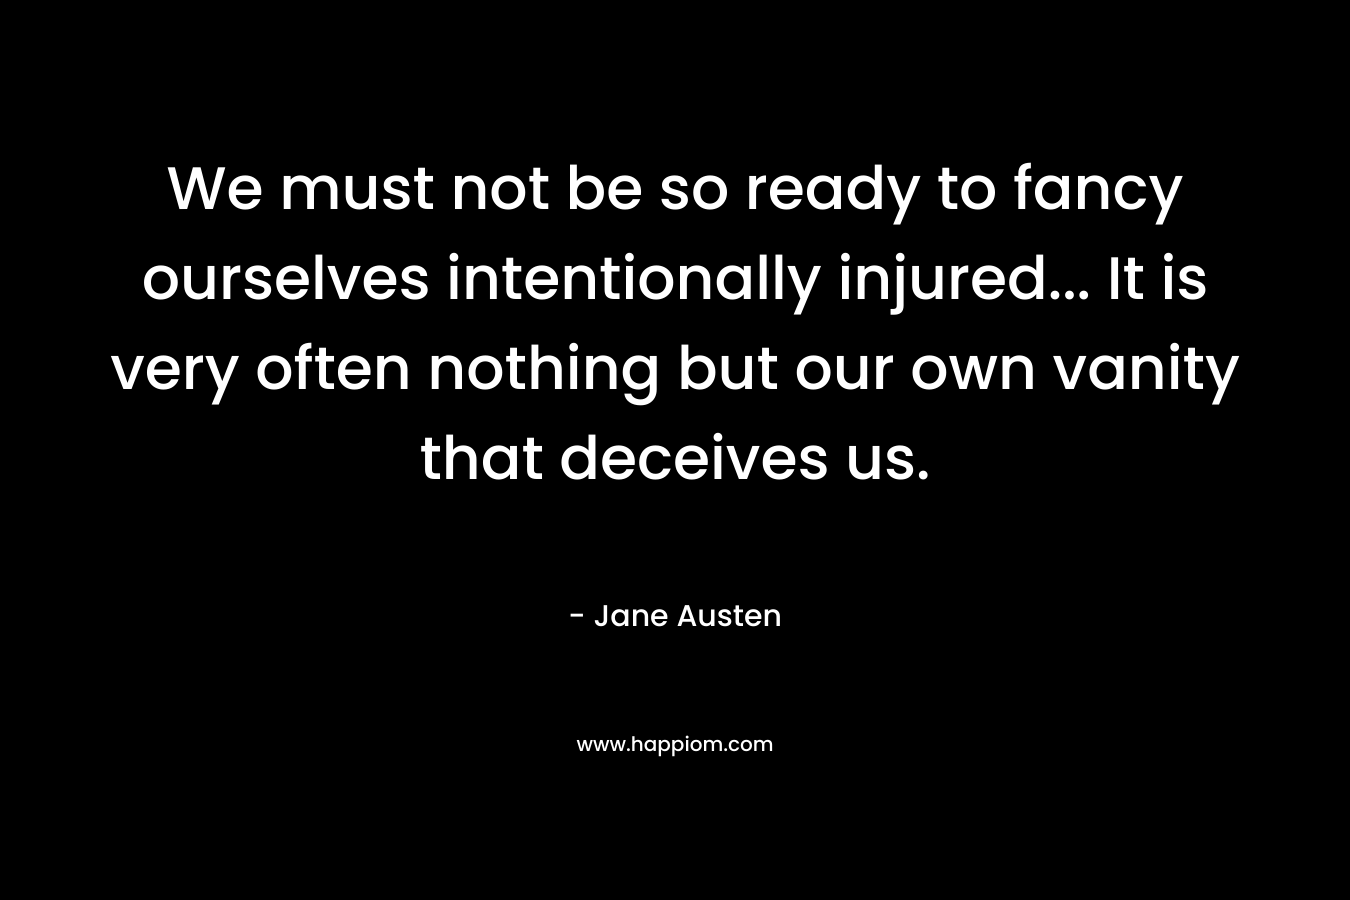 We must not be so ready to fancy ourselves intentionally injured… It is very often nothing but our own vanity that deceives us. – Jane Austen